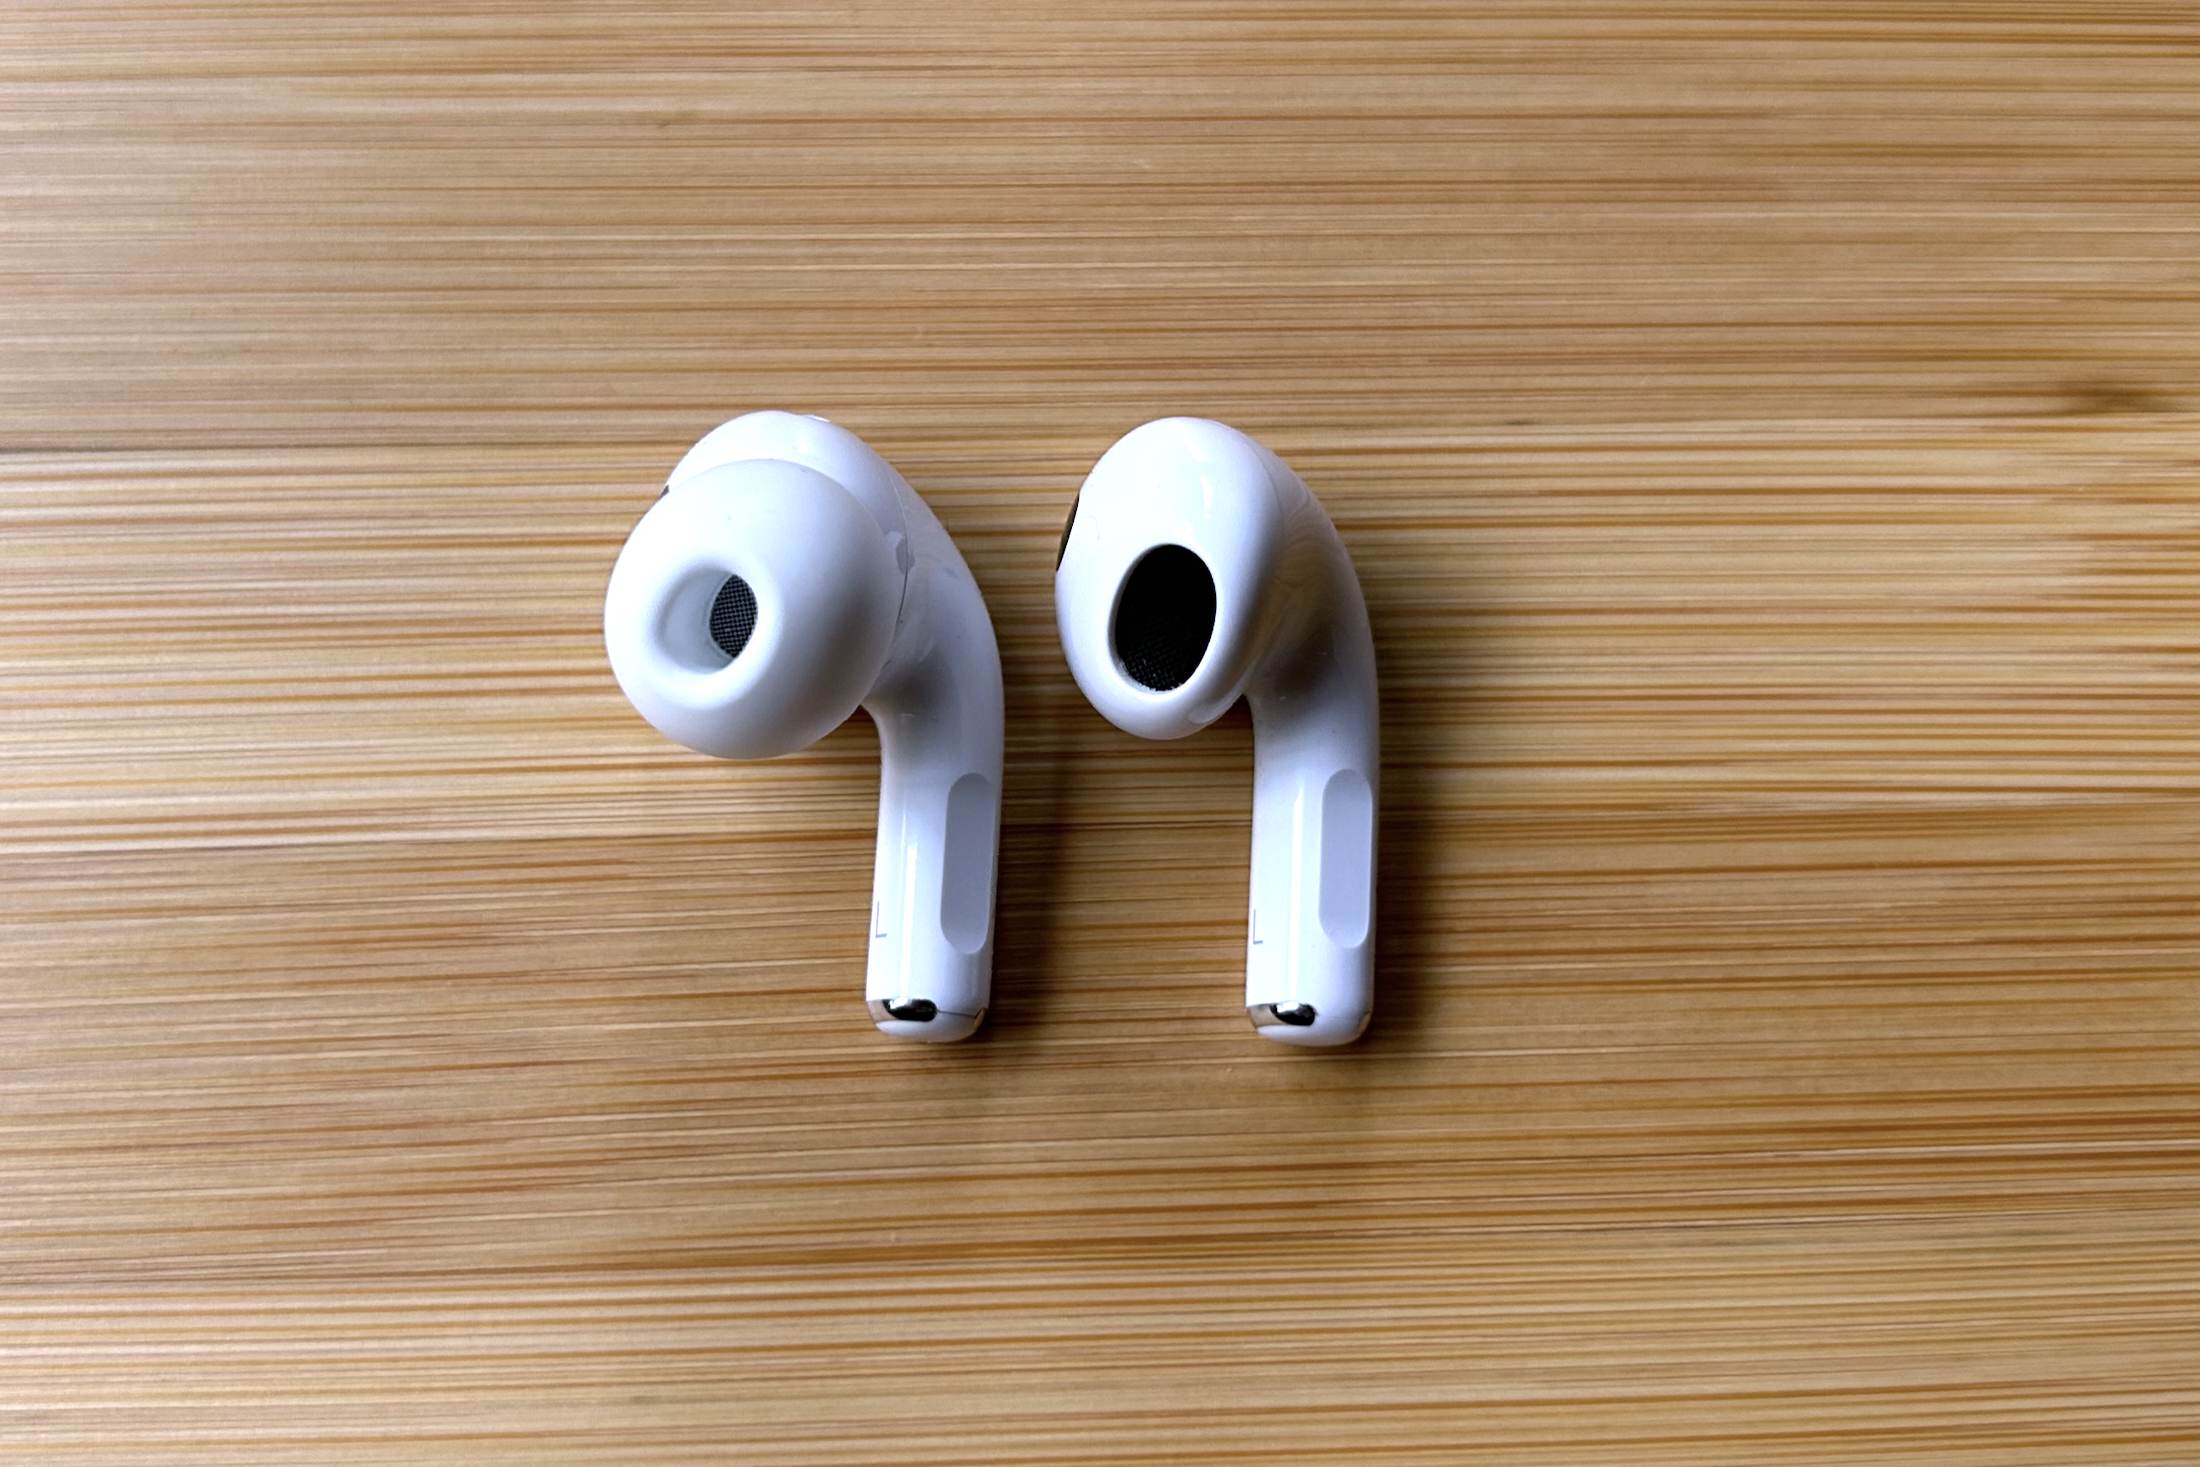 Apple AirPods Pro 2 vs. AirPods 3: which should you buy?